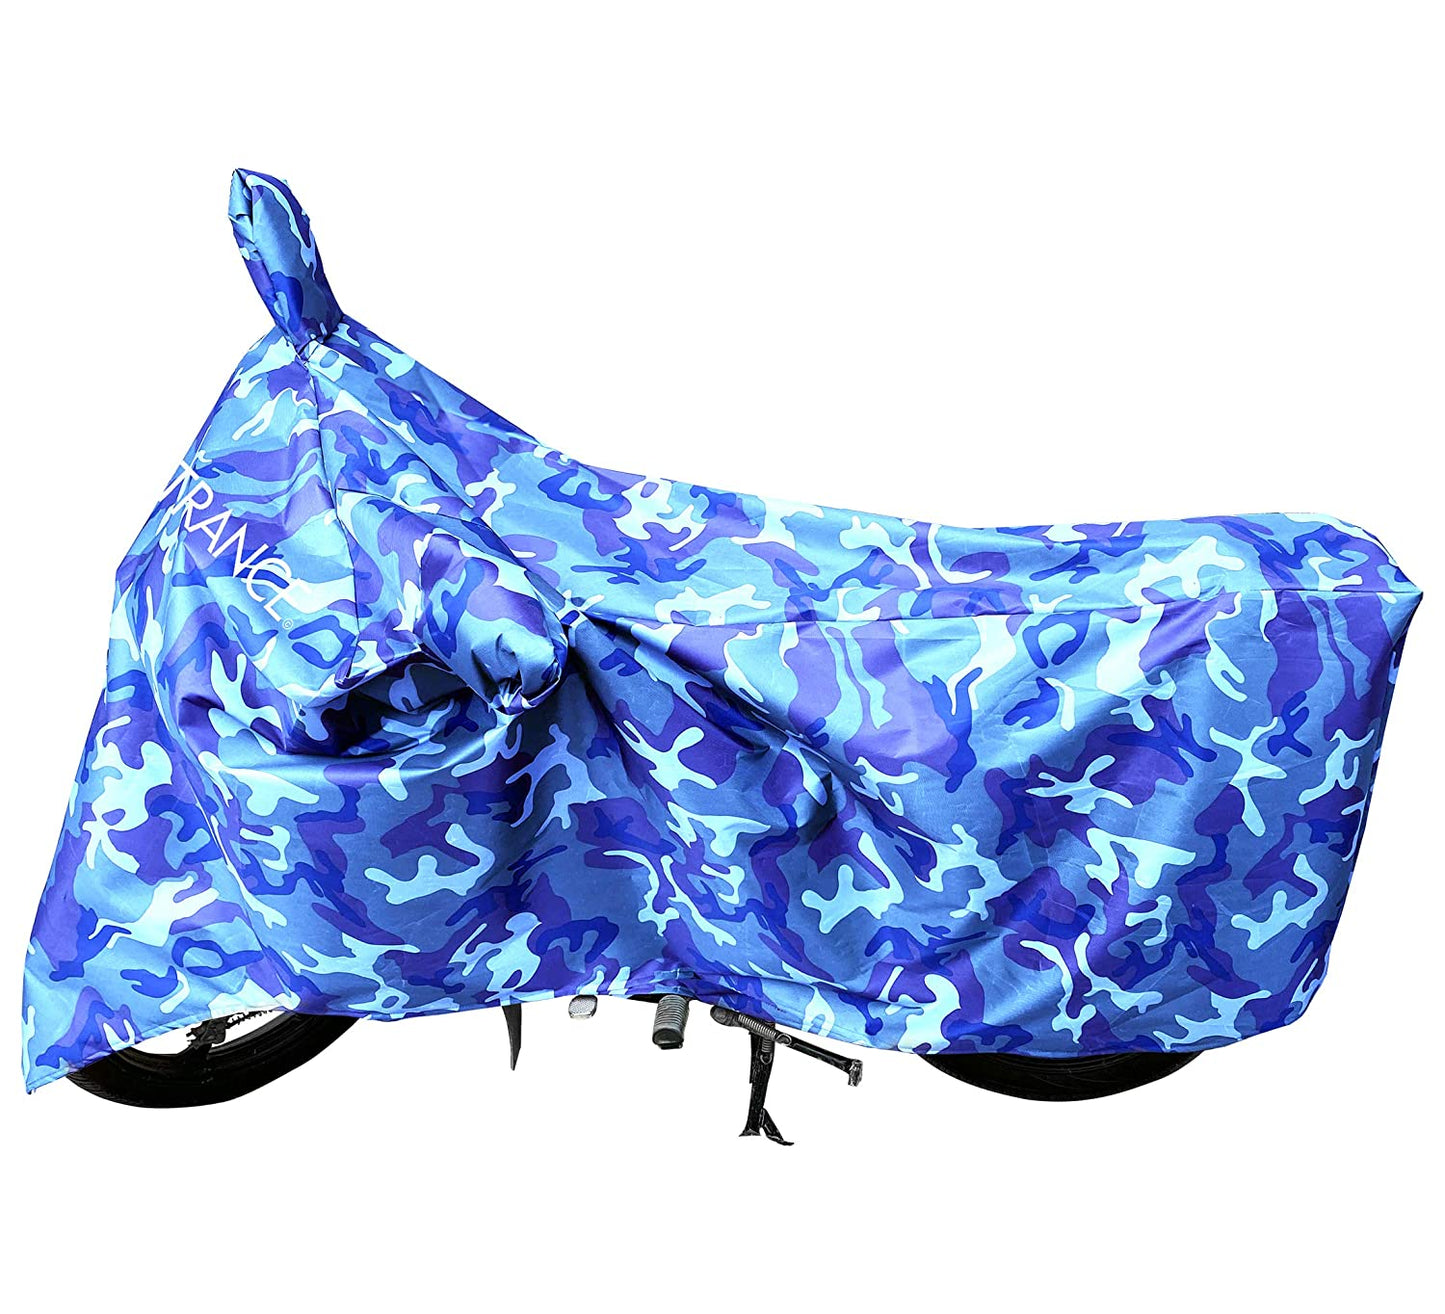 MotoTrance Jungle Bike Body Covers For TVS Max 4R - Interlock-Stitched Waterproof and Heat Resistant with Mirror Pockets